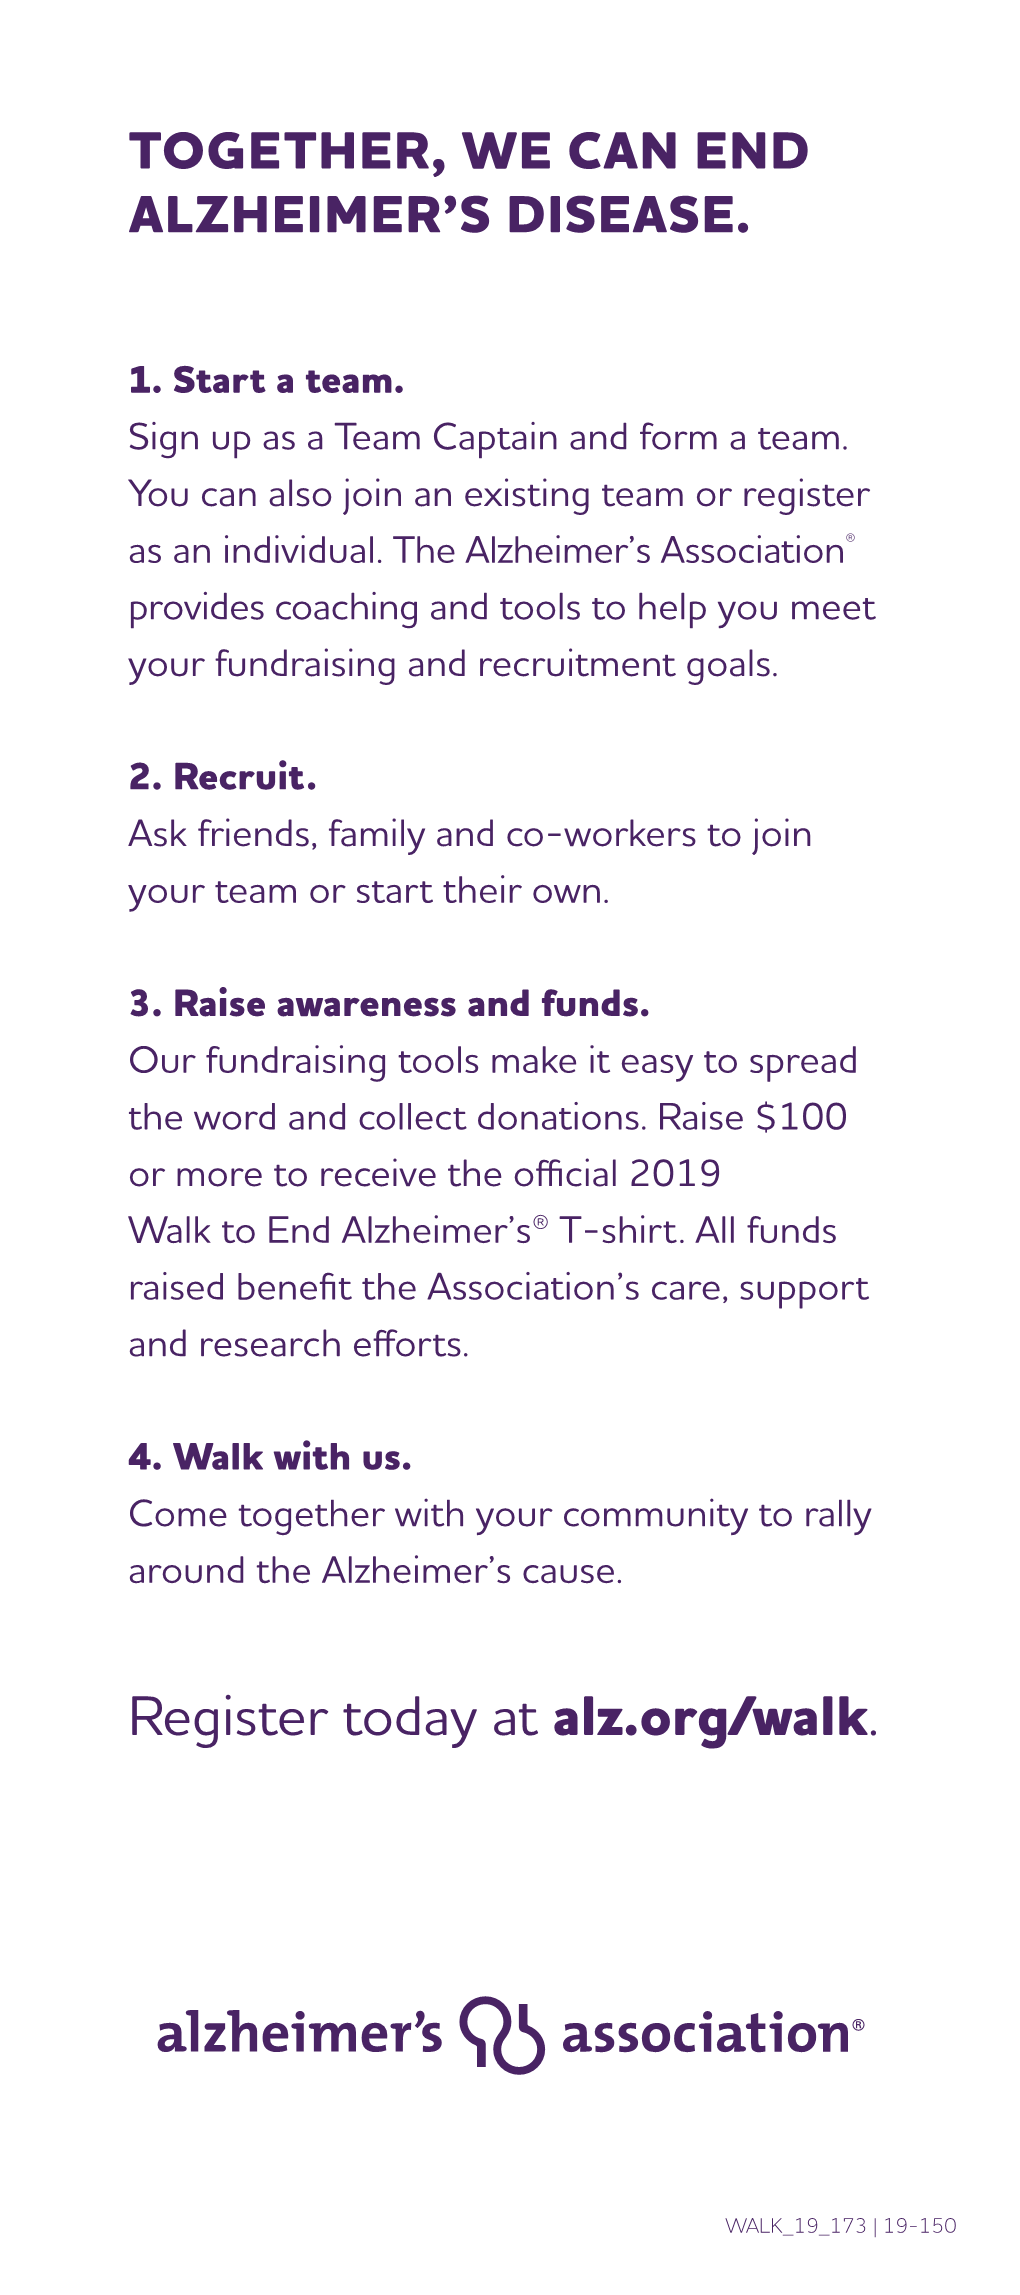 Together, We Can End Alzheimer's Disease